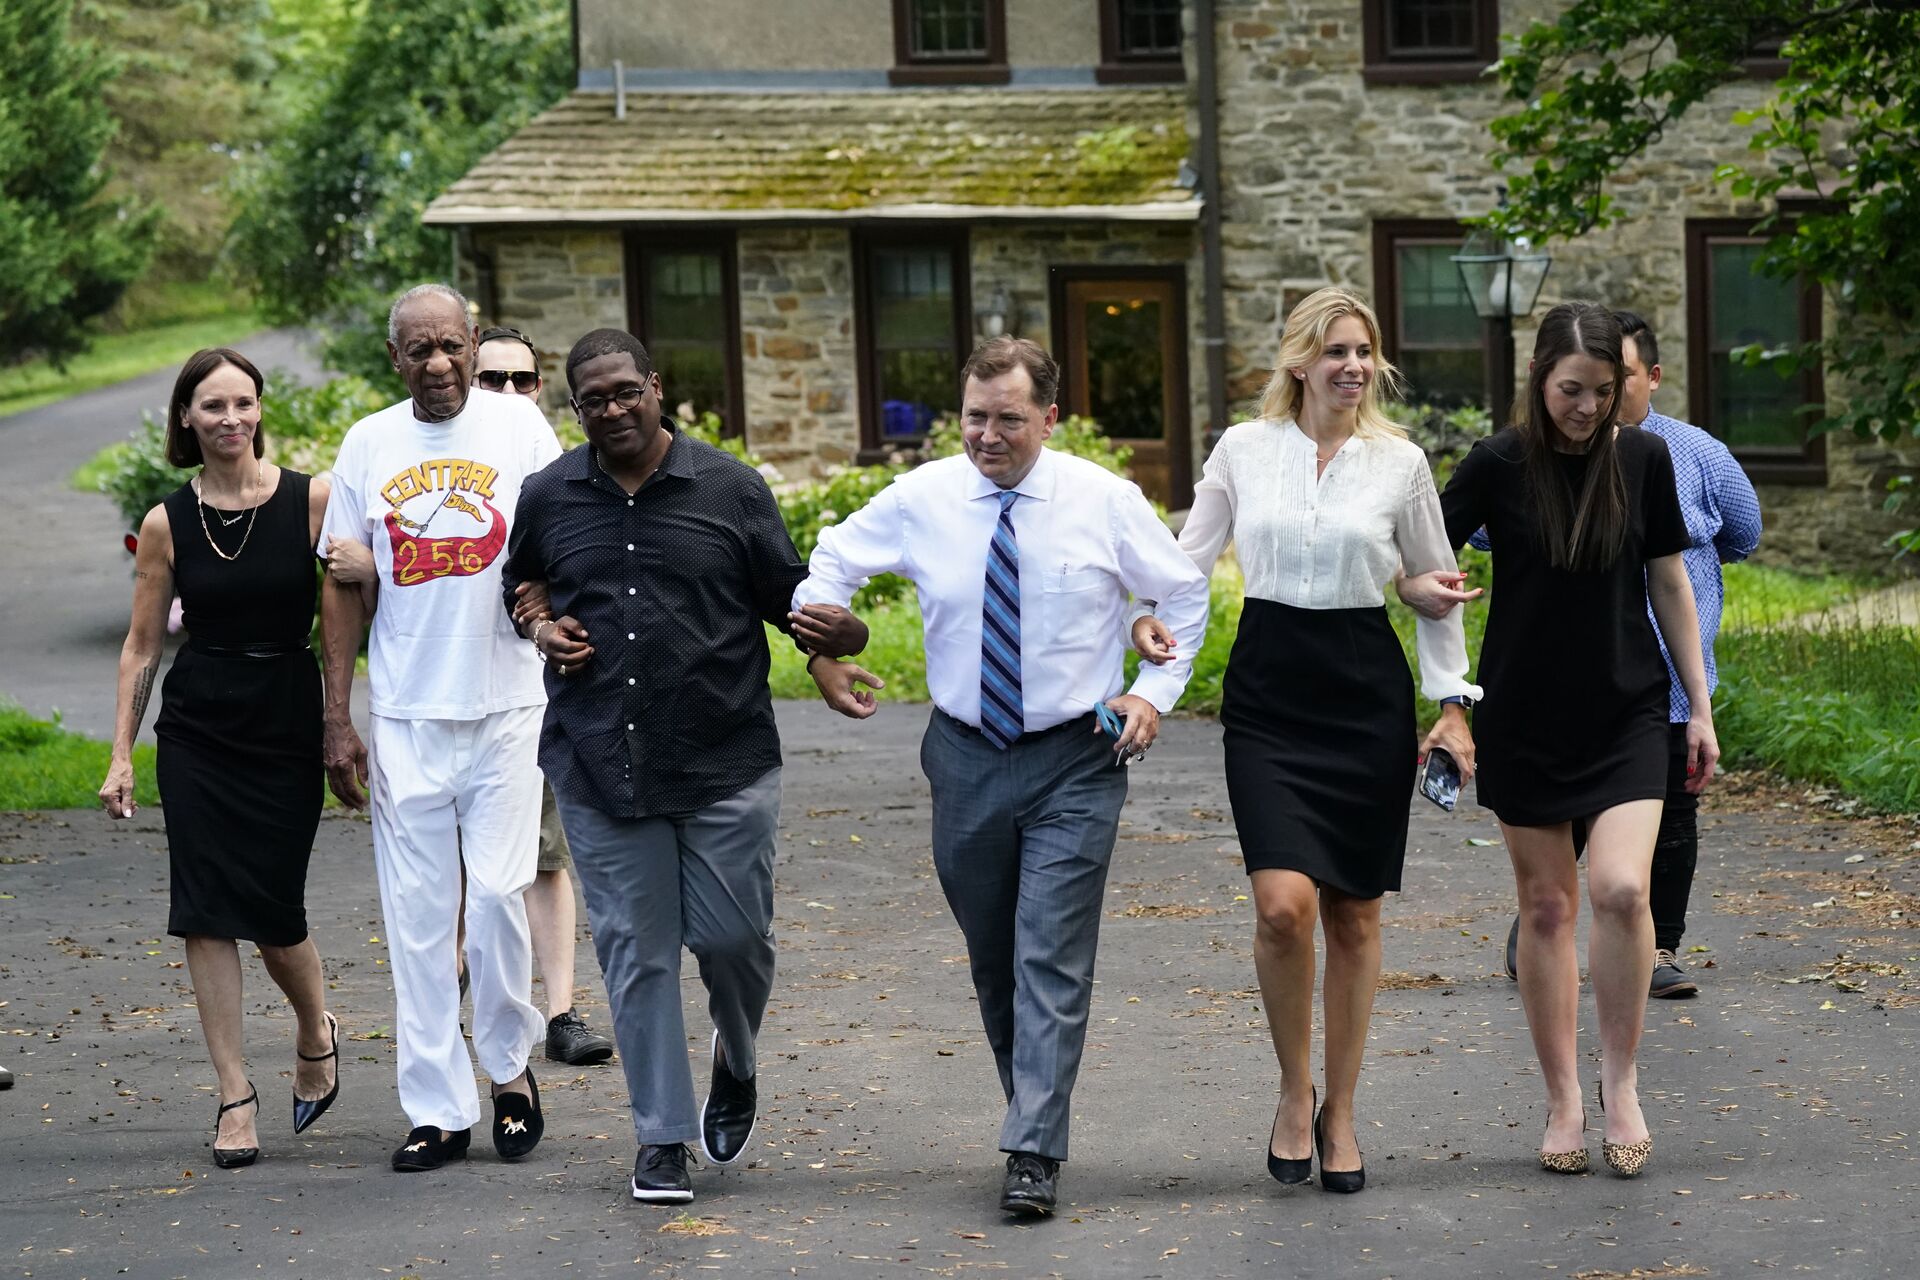 Bill Cosby, second left, and spokesperson Andrew Wyatt, third left, approach members of the media gathered outside Cosby's home in Elkins Park, Pa., Wednesday, June 30, 2021, after Pennsylvania's highest court overturned his sex assault conviction - Sputnik International, 1920, 07.09.2021